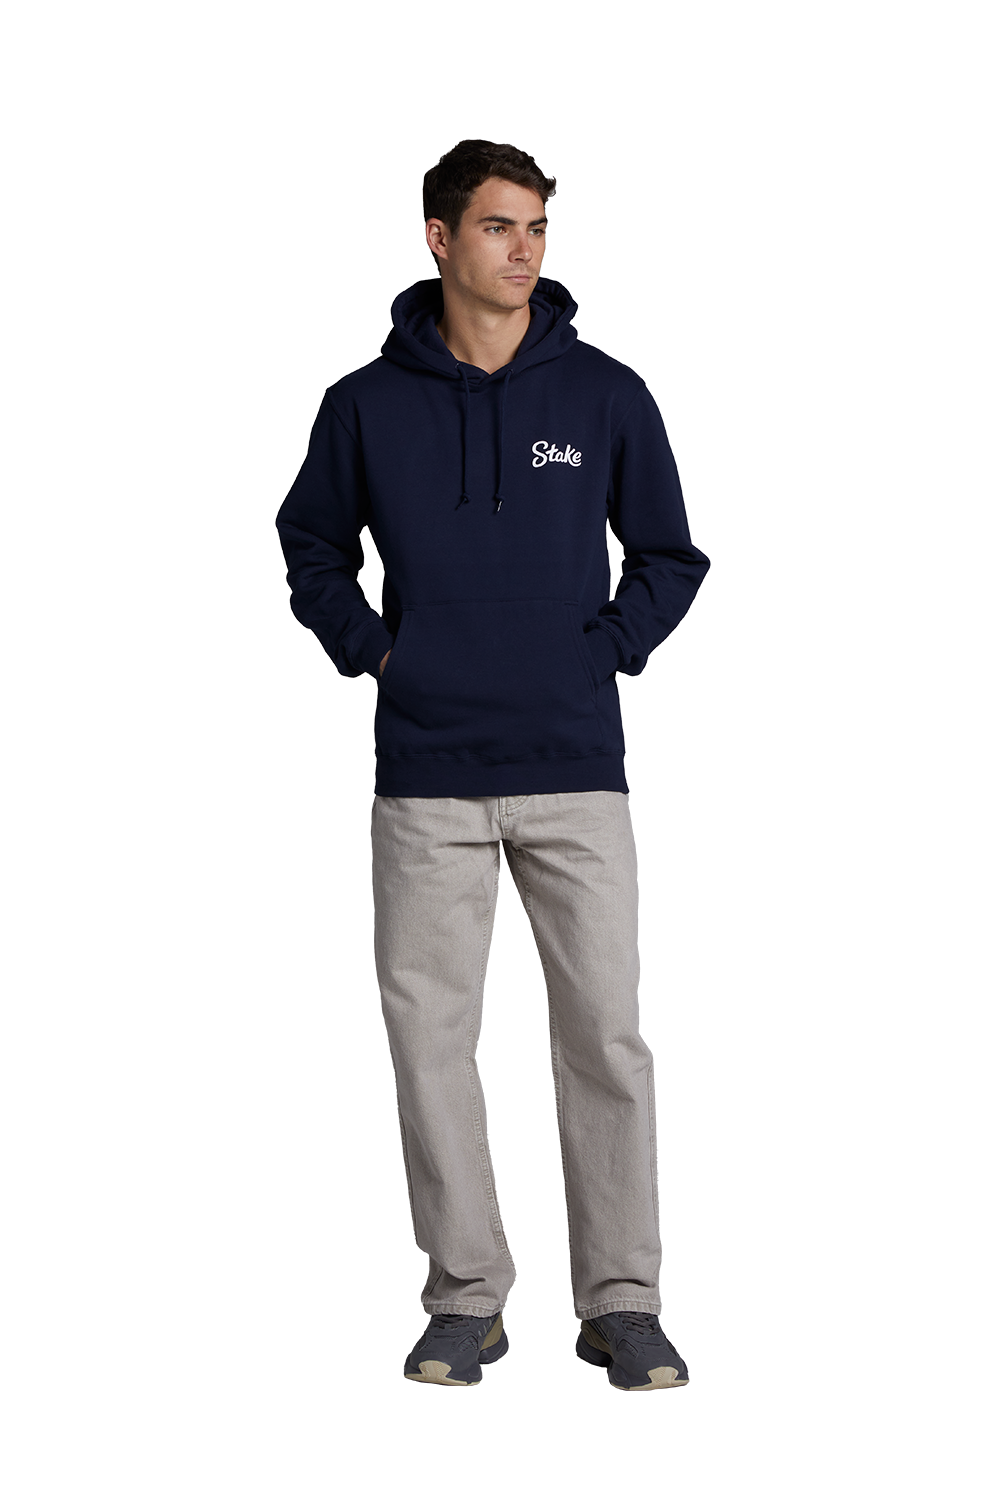 White on Navy Stake Hoodie